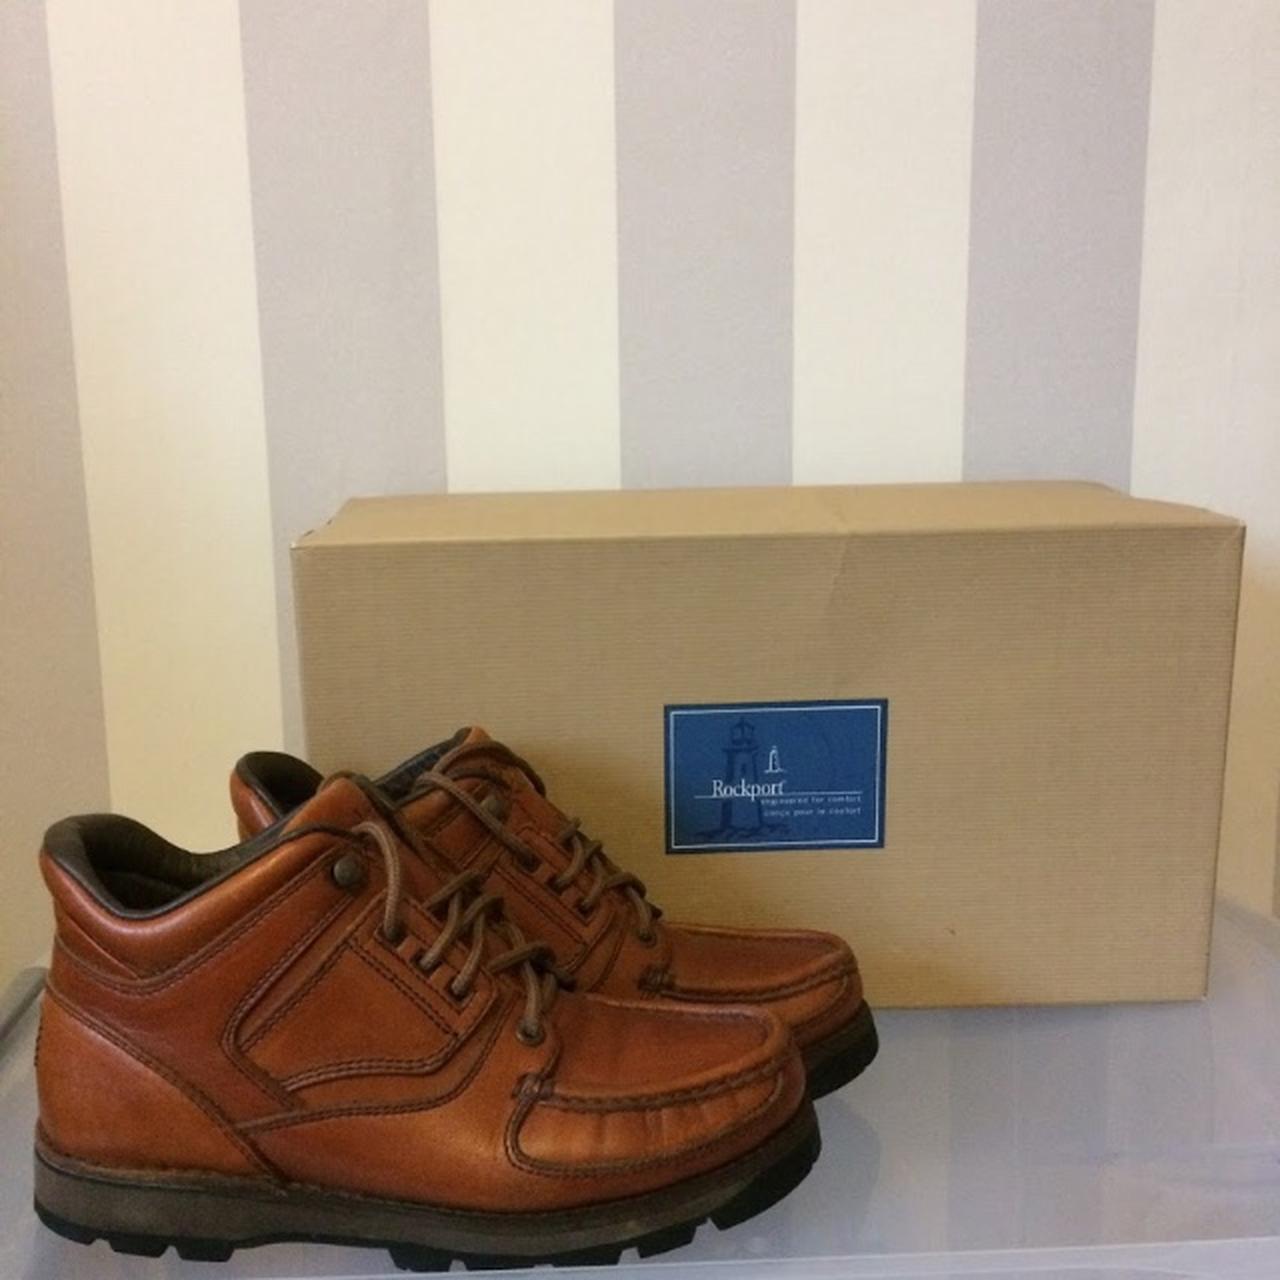 Rockport XCS walking boots. Iconic boot from the... - Depop